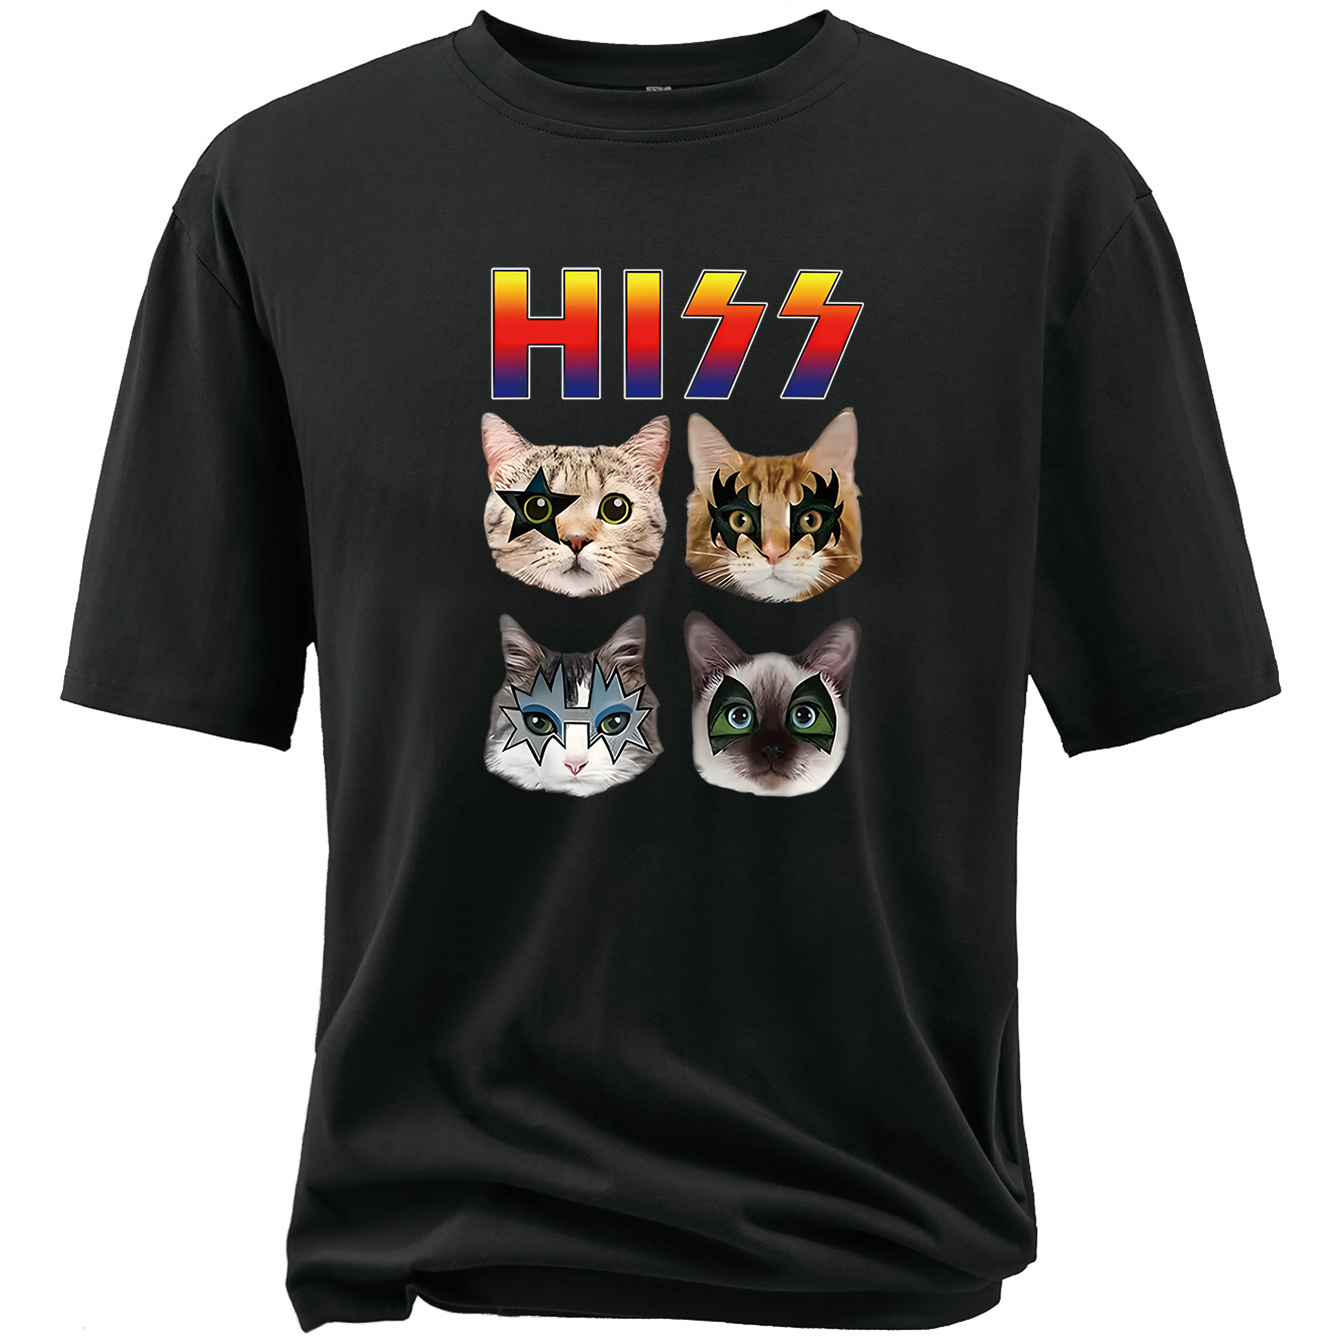 

Plus Size Cat Print Men's Round Neck Short Sleeve Tee Fashion Regular Fit T-shirt Top For Spring Summer Holiday Daily Commute Dates